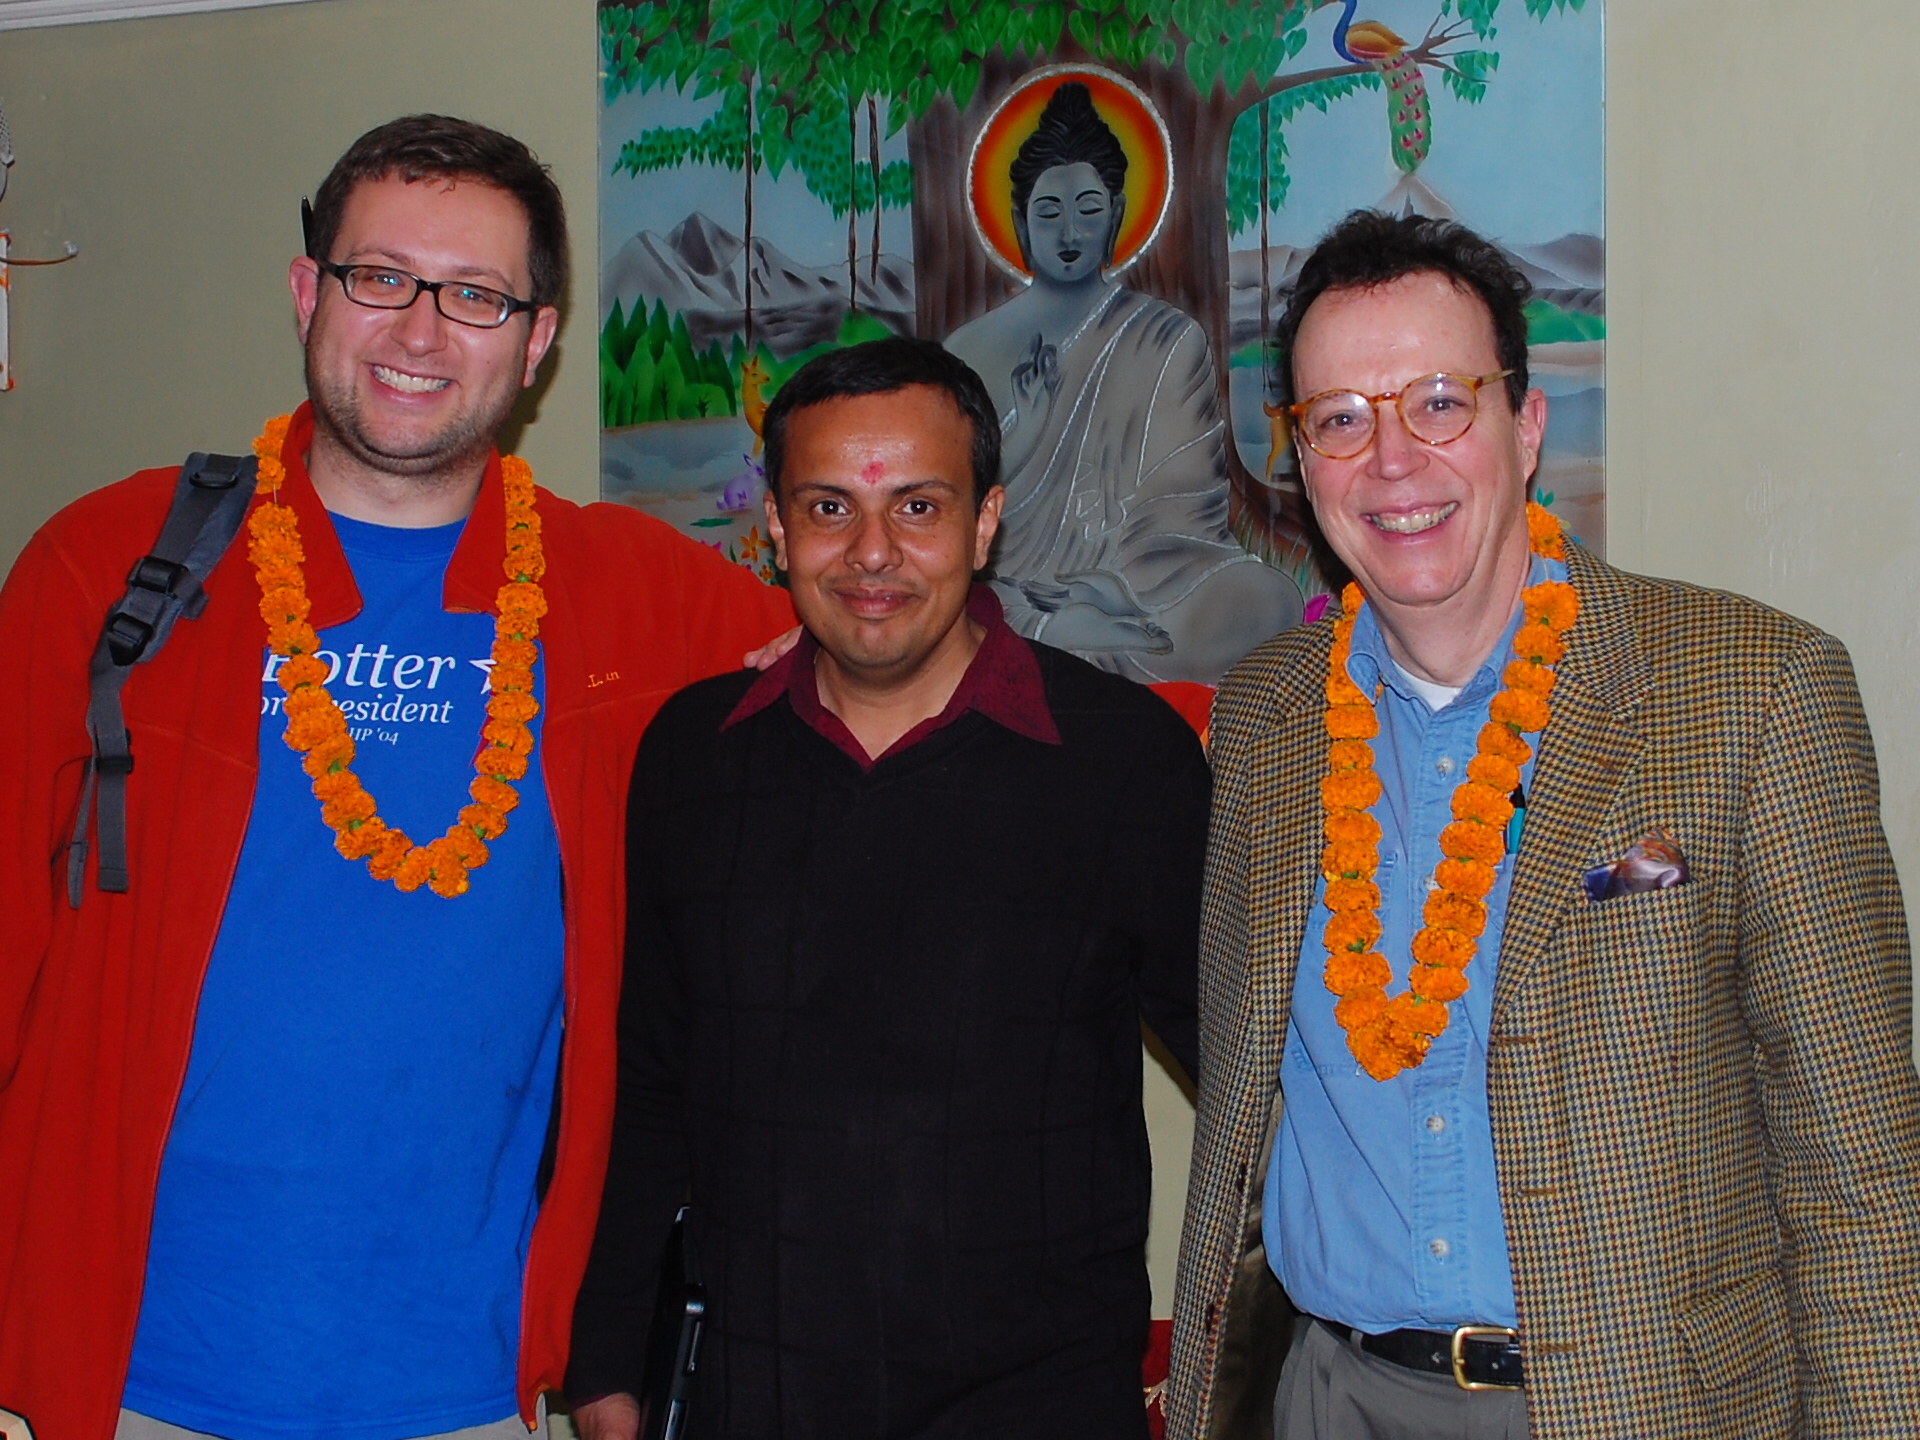 From left, ITS Educational Technologist Ted Fondak, Assistant Professor of Religious Studies Abhishek Amar and Professor of French John O'Neal in front of a painting of the Buddha in India.